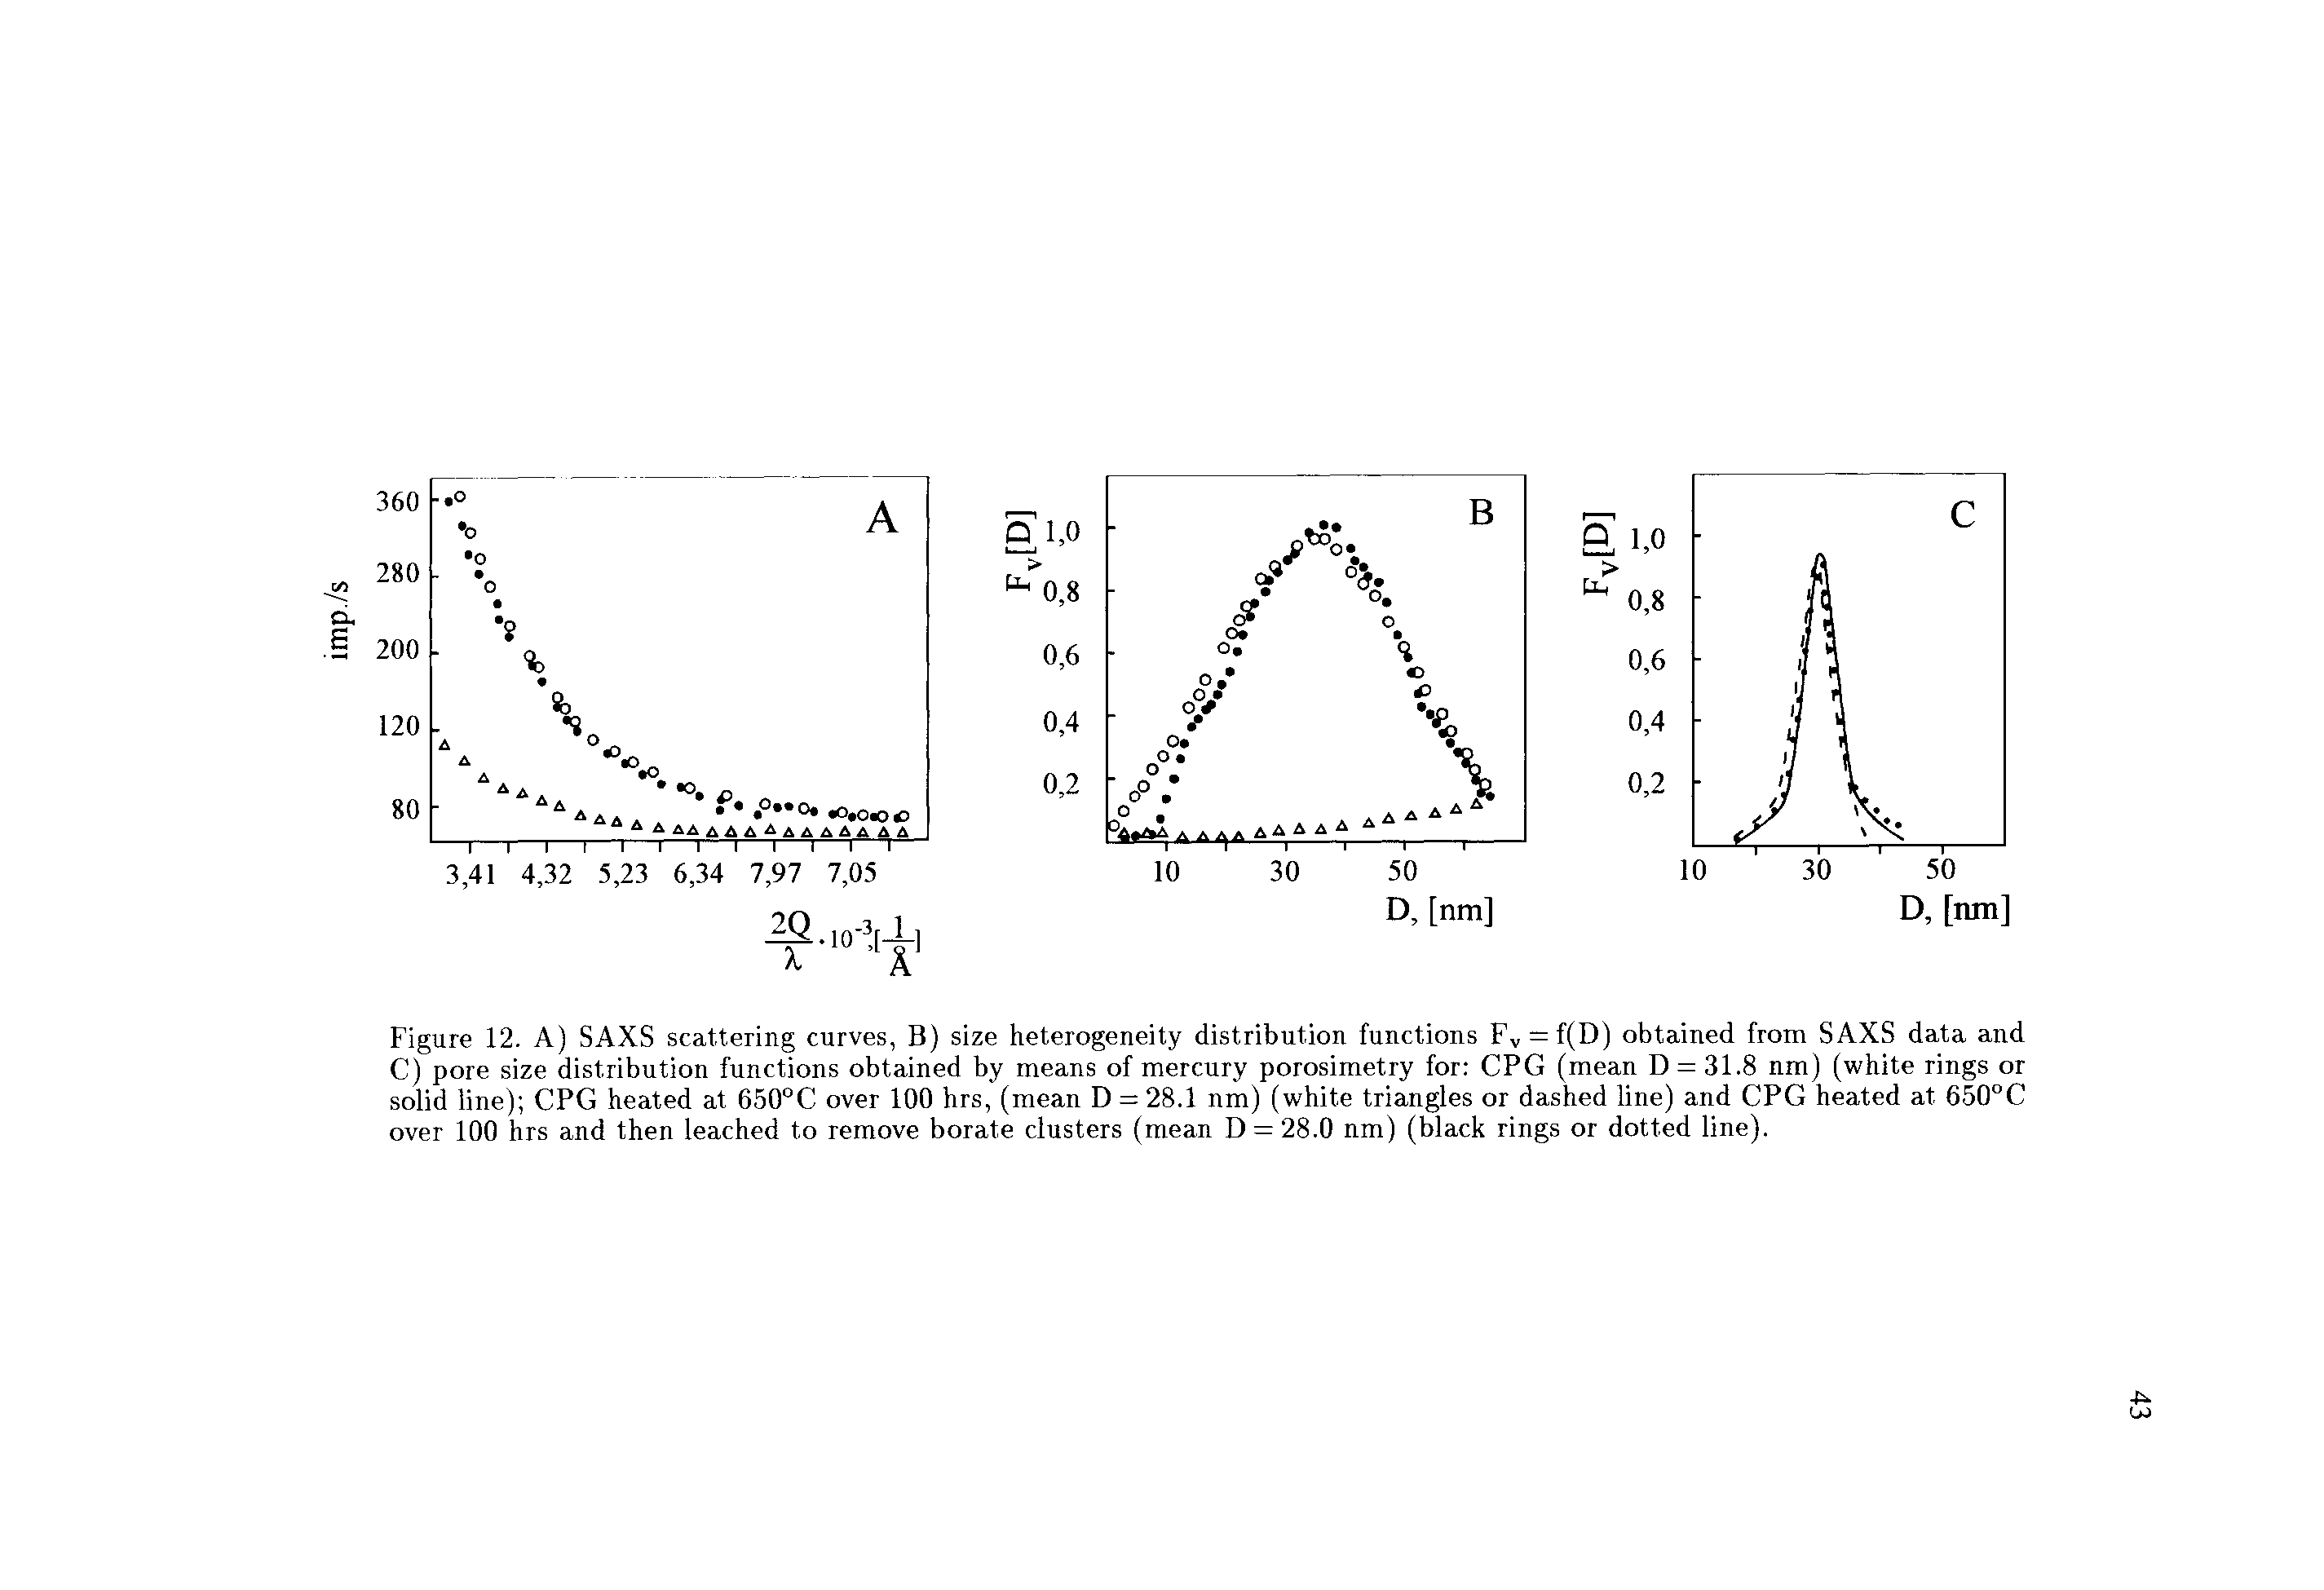 Figure 12. A) SAXS scattering curves, B) size heterogeneity distribution functions Fv = f(D) obtained from SAXS data and C) pore size distribution functions obtained by means of mercury porosimetry for CPG (mean D = 31.8 nm) (white rings or solid line) CPG heated at 650 C over 100 hrs, (mean D = 28.1 nm) (white triangles or dashed line) and CPG heated at 650°C over 100 hrs and then leached to remove borate clusters (mean D = 28.0 nm) (black rings or dotted line).